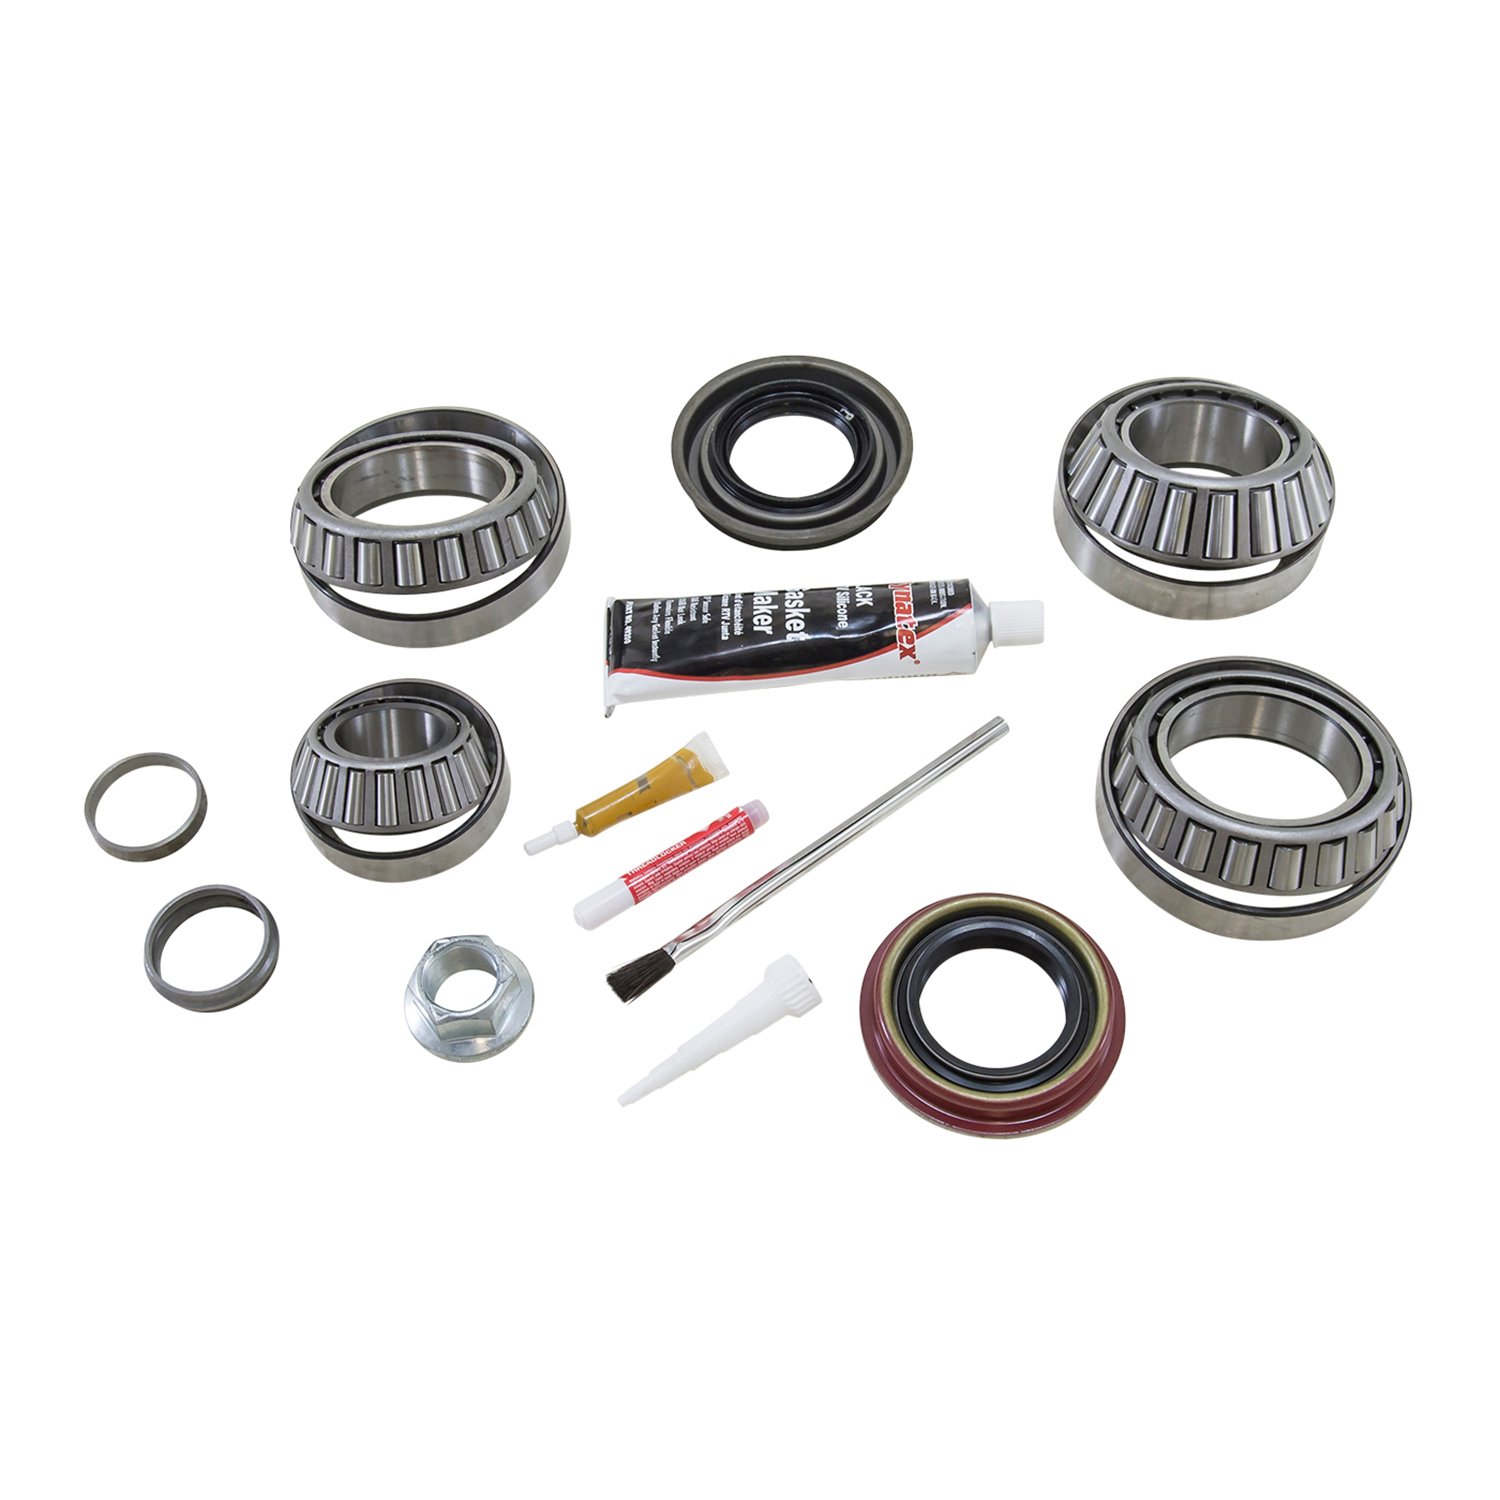 AXLE DIFF BRG & SEAL KIT